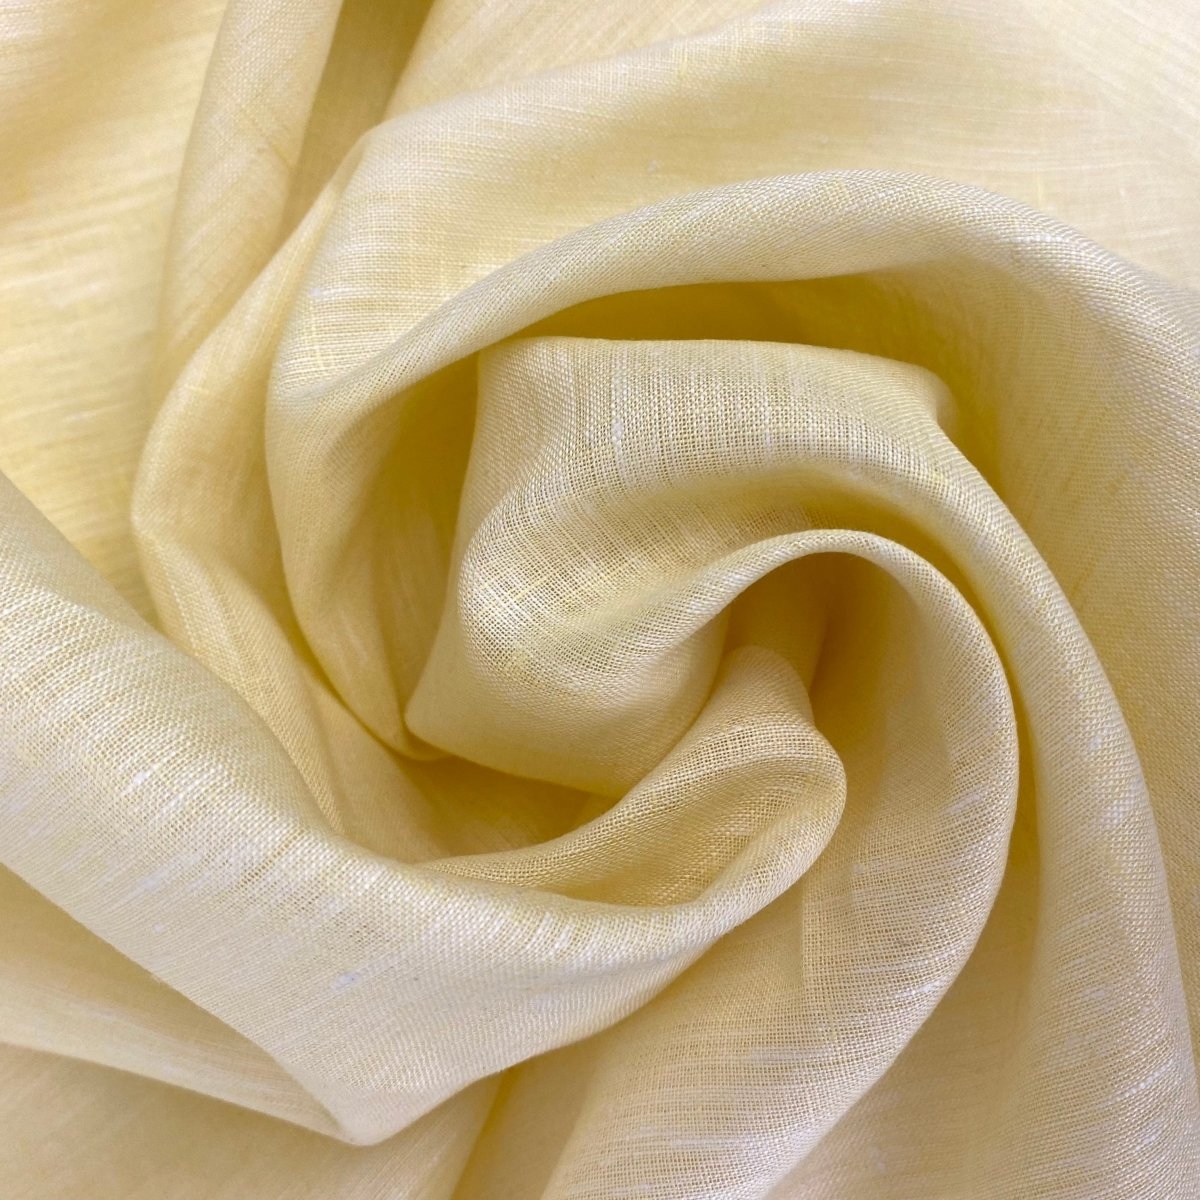 As the weather starts to warm up, we're thinking about light weight linen! This gorgeous lemon is one of our Ozone Linens.

l8r.it/iMQr

#sewinggem #sewing #lovetosew #memade #imakemyclothes #isew #handmadewardrobe  #fabricstore #sewistsofinstagram #dressmaker